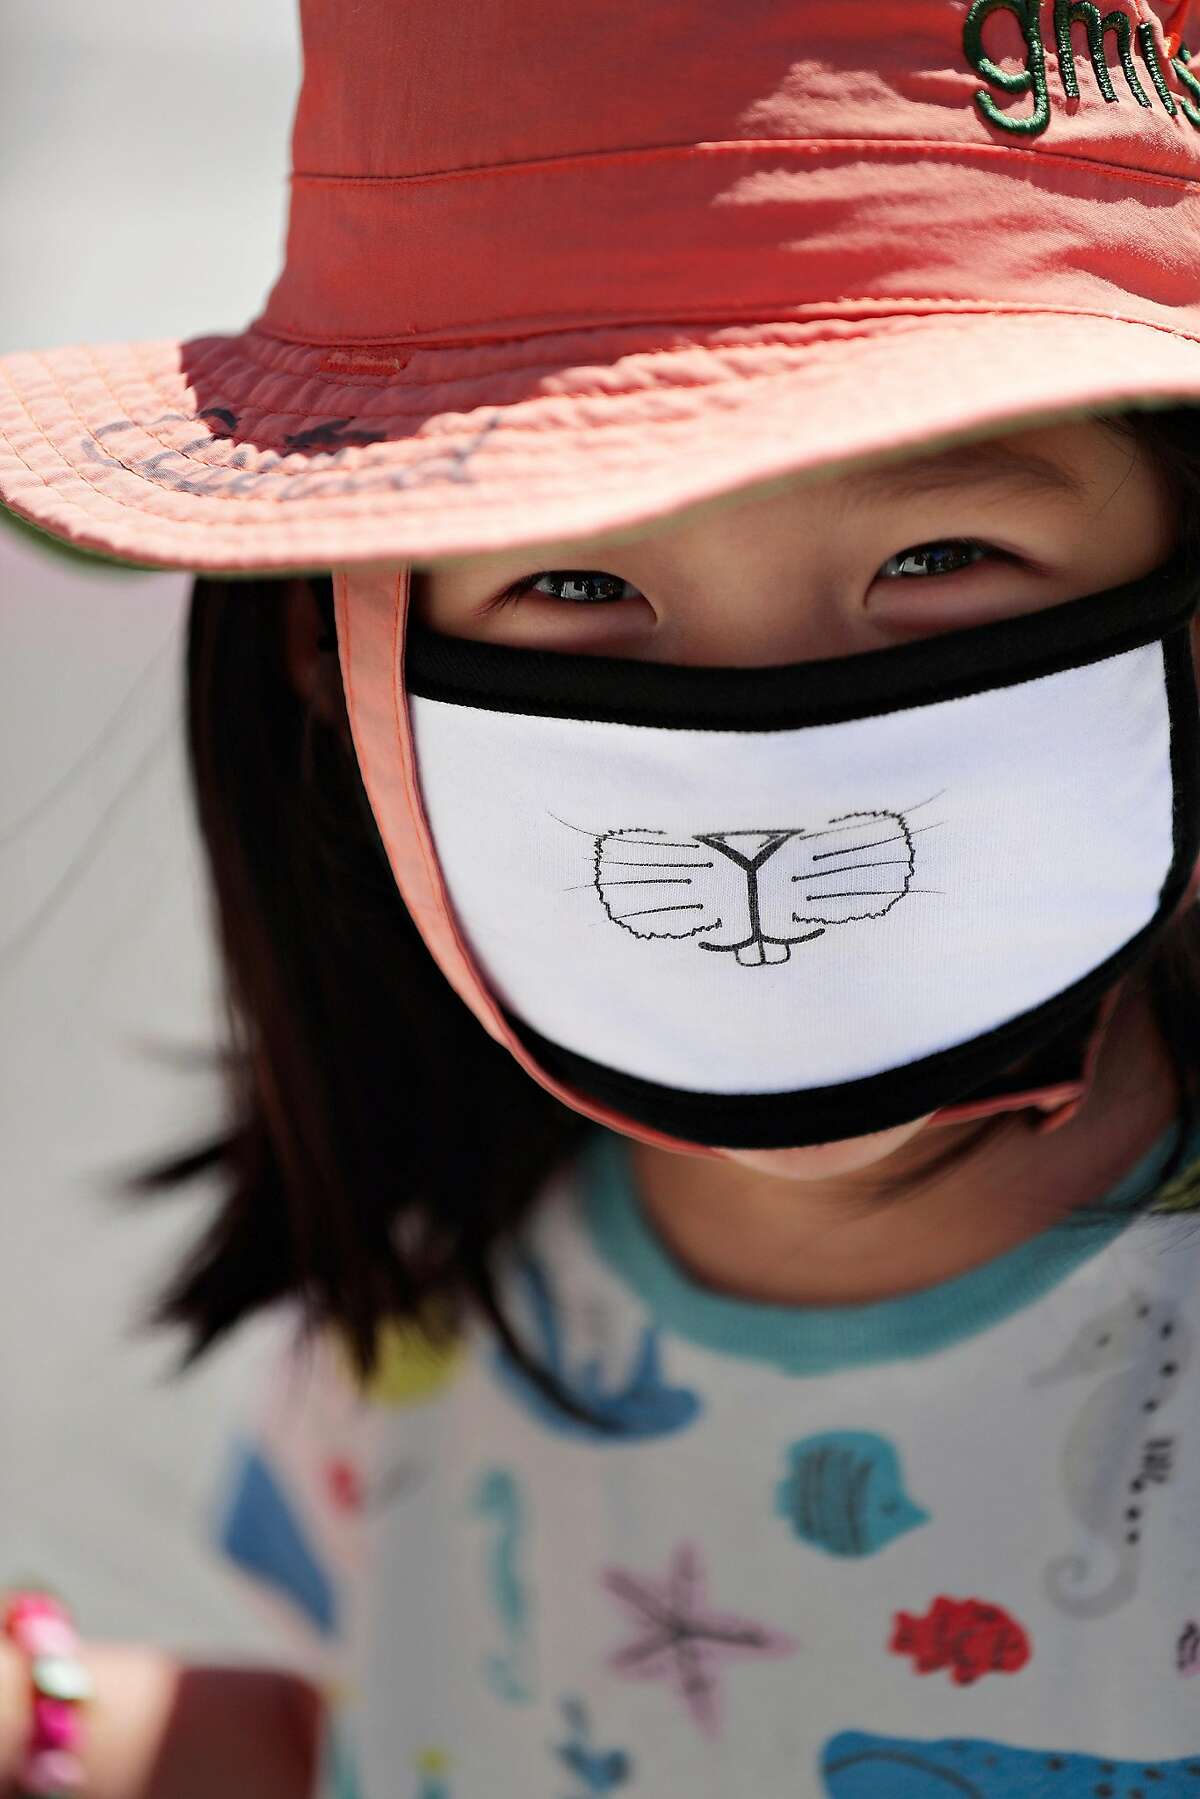 Astrid Chen smiles as she wears a mask with her mom in Monclair Village in Oakland, Calif., on Tuesday, June 30, 2020. As more positive test results show a spike in the coronavirus infections, people wanting to get outside are wearing masks to prevent the spread of the disease.